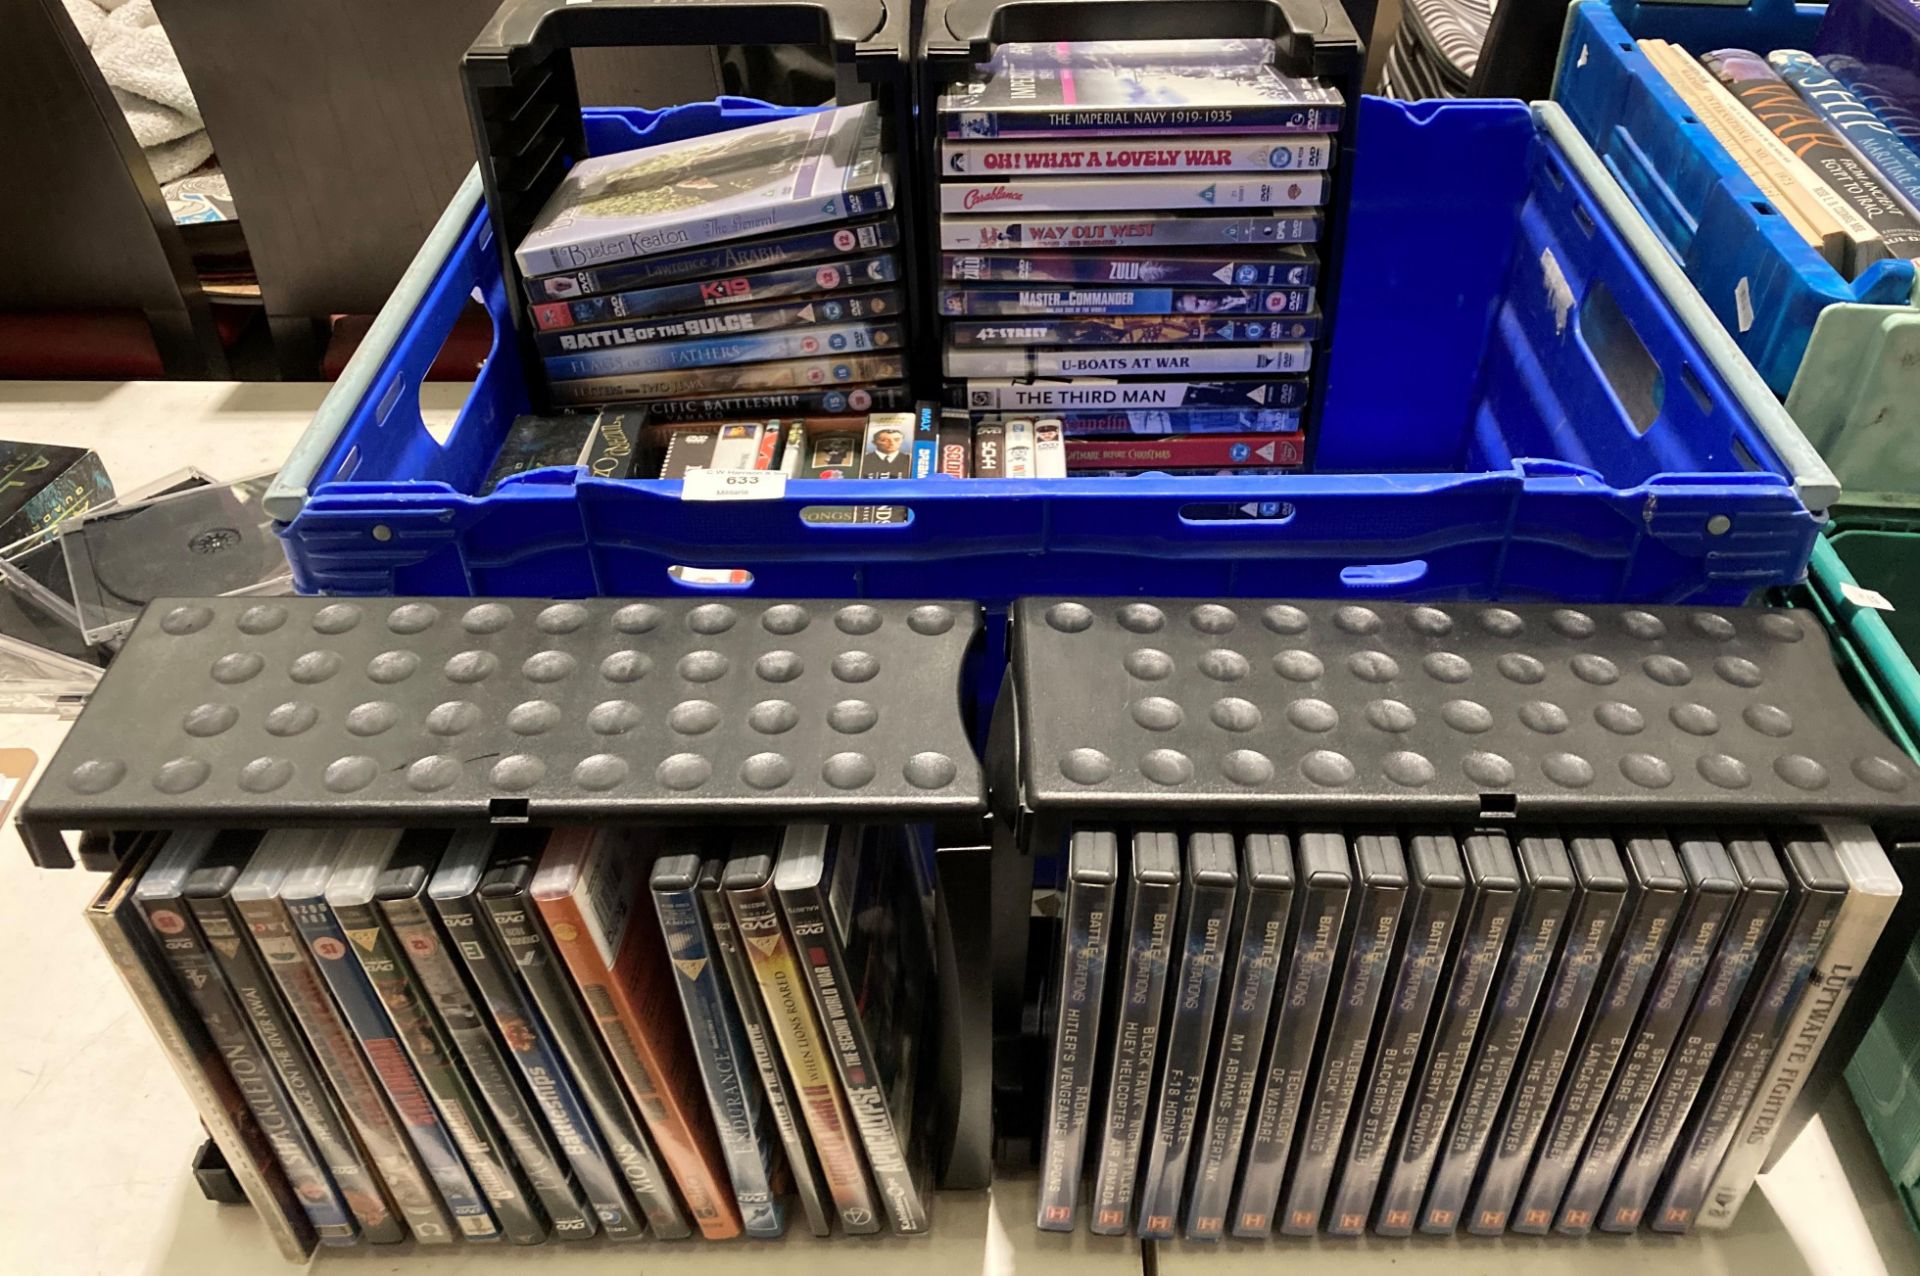 Contents to blue plastic crate - approximately 68 DVDs etc.